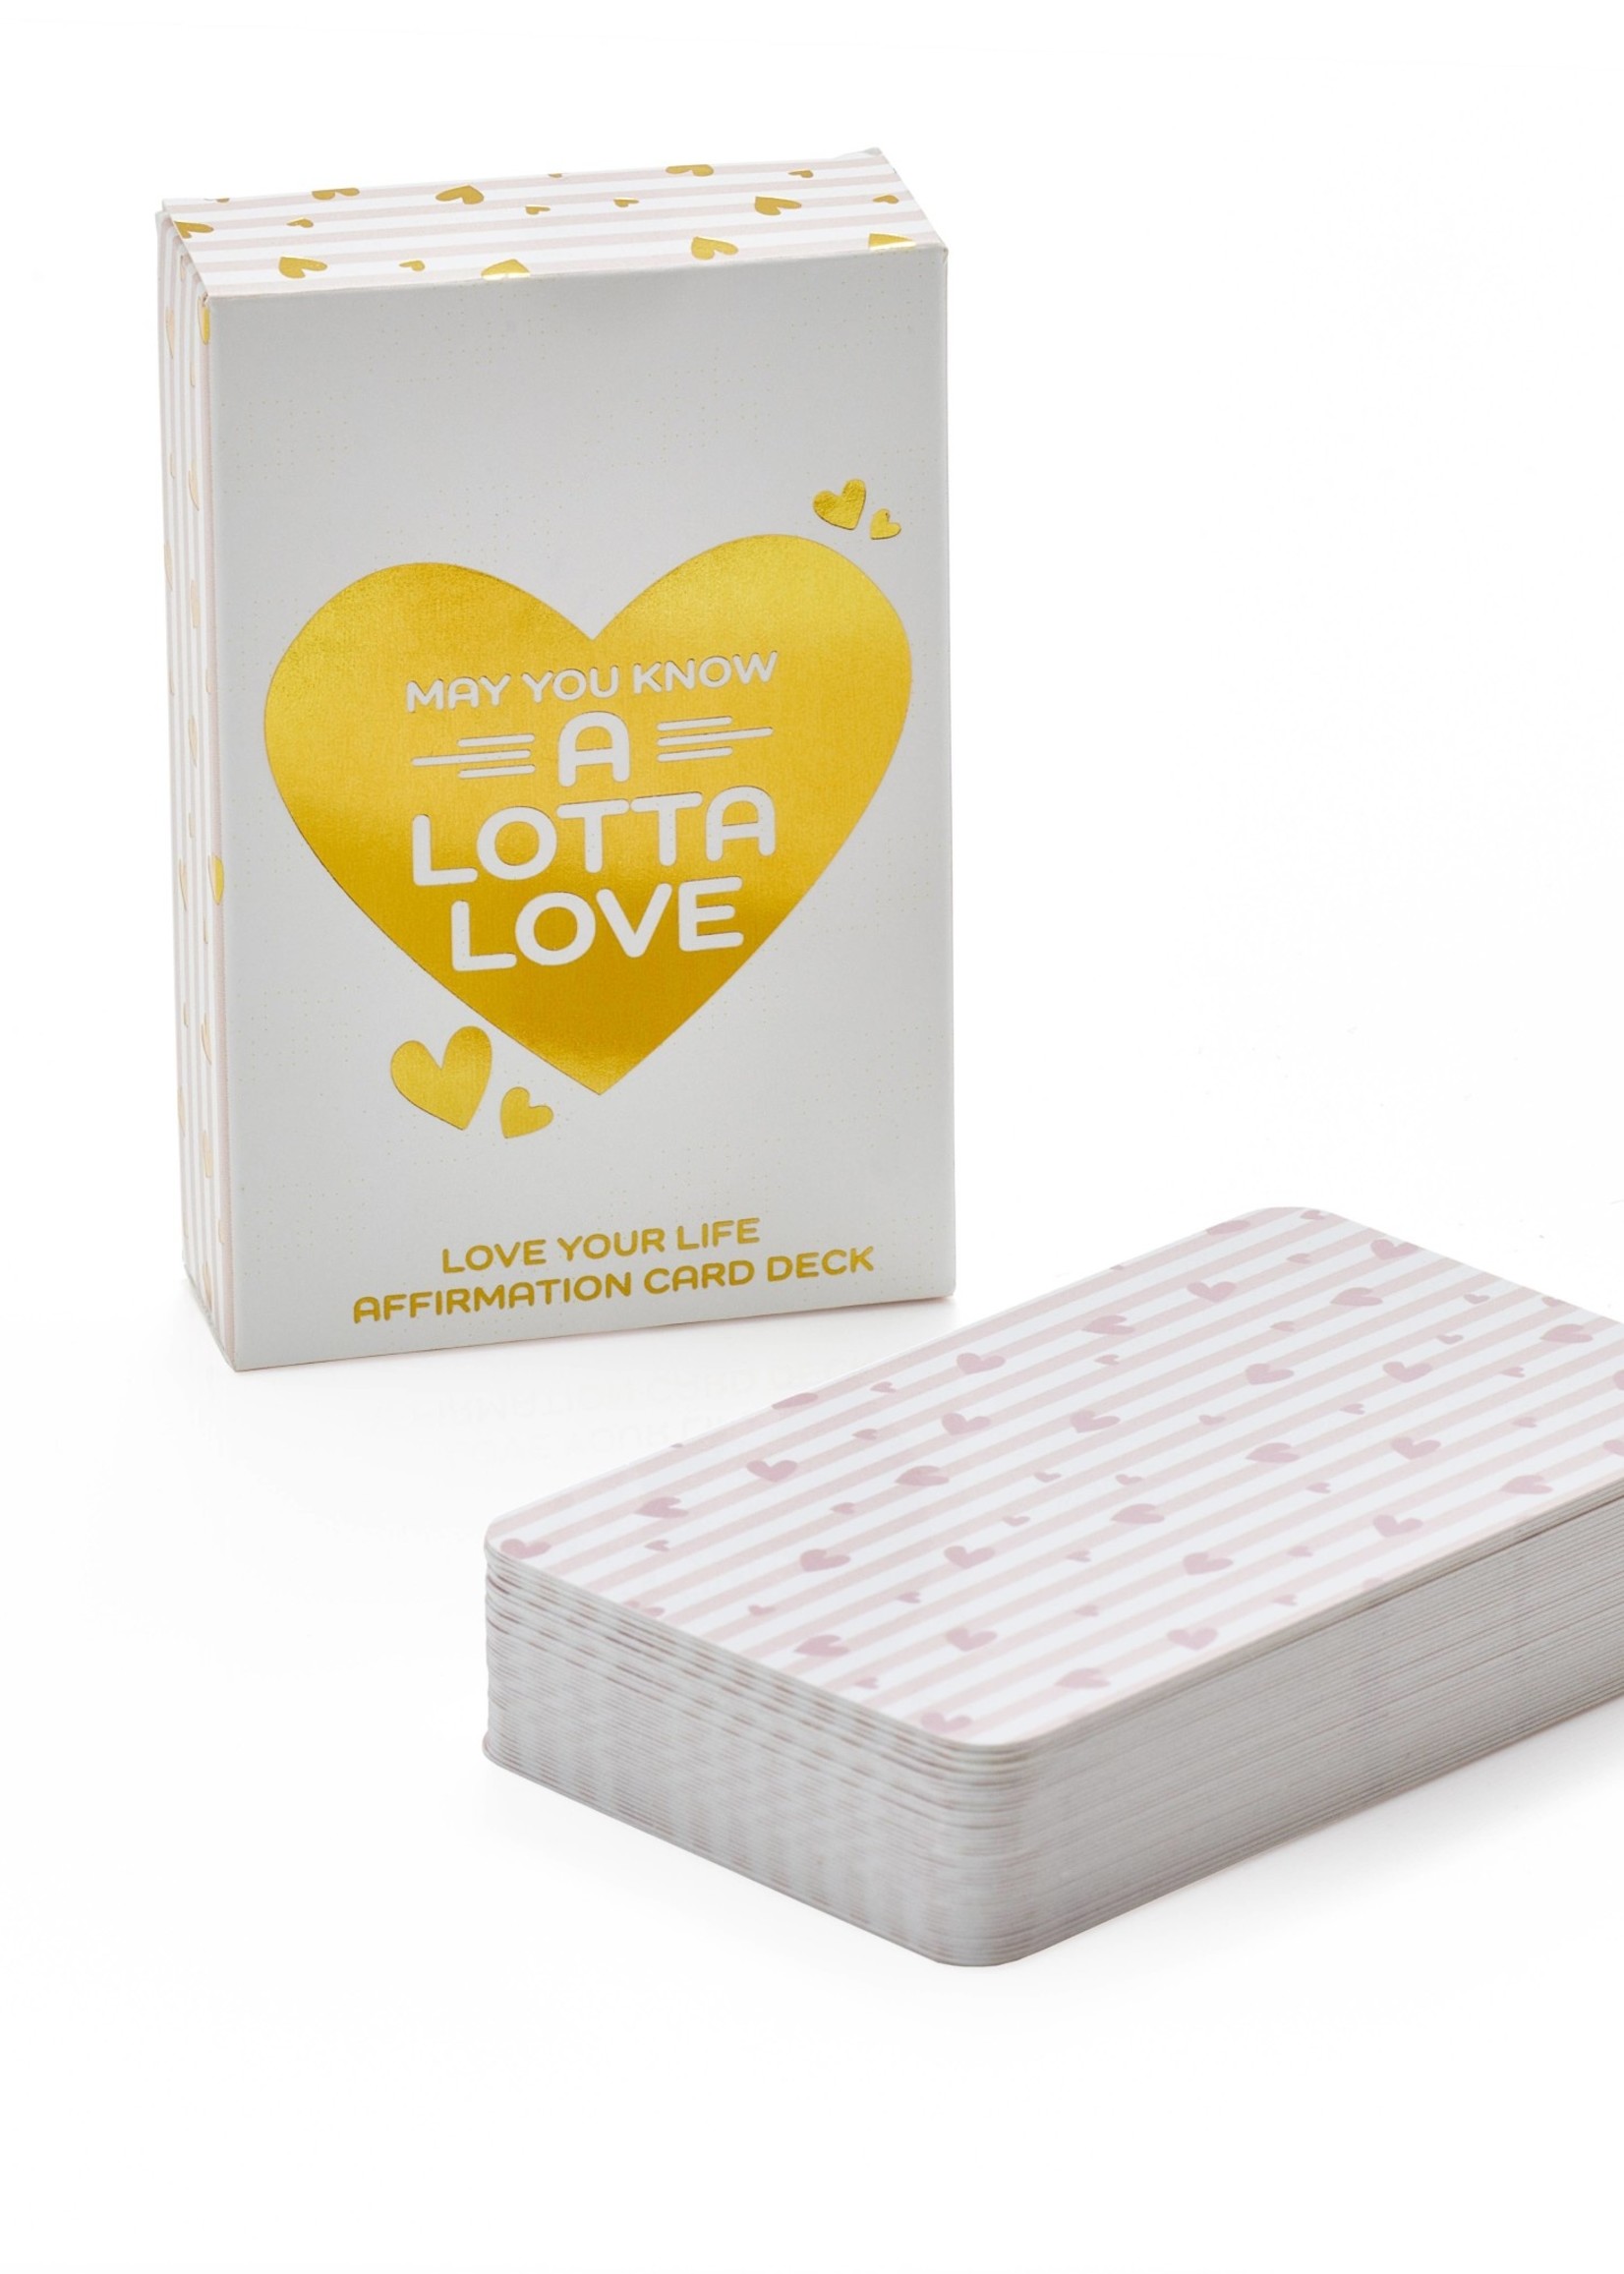 May You Know Joy Inc. A Lotta Love Affirmation Deck